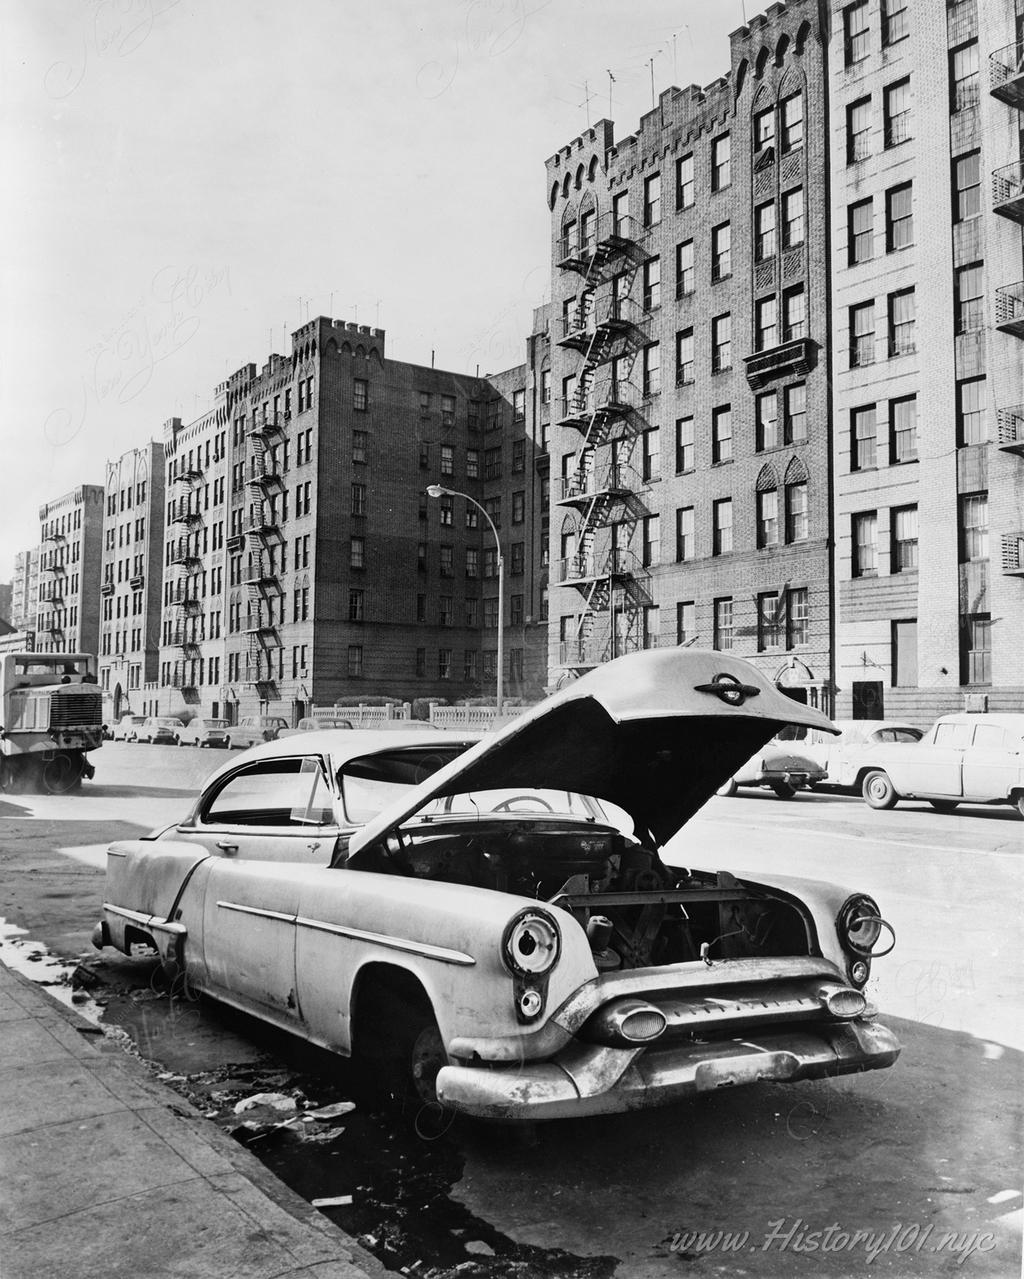 Phil Stanziola's 1964 Bronx photo captures the stark reality of urban decay alongside active street cleaning, illustrating NYC's contrasts